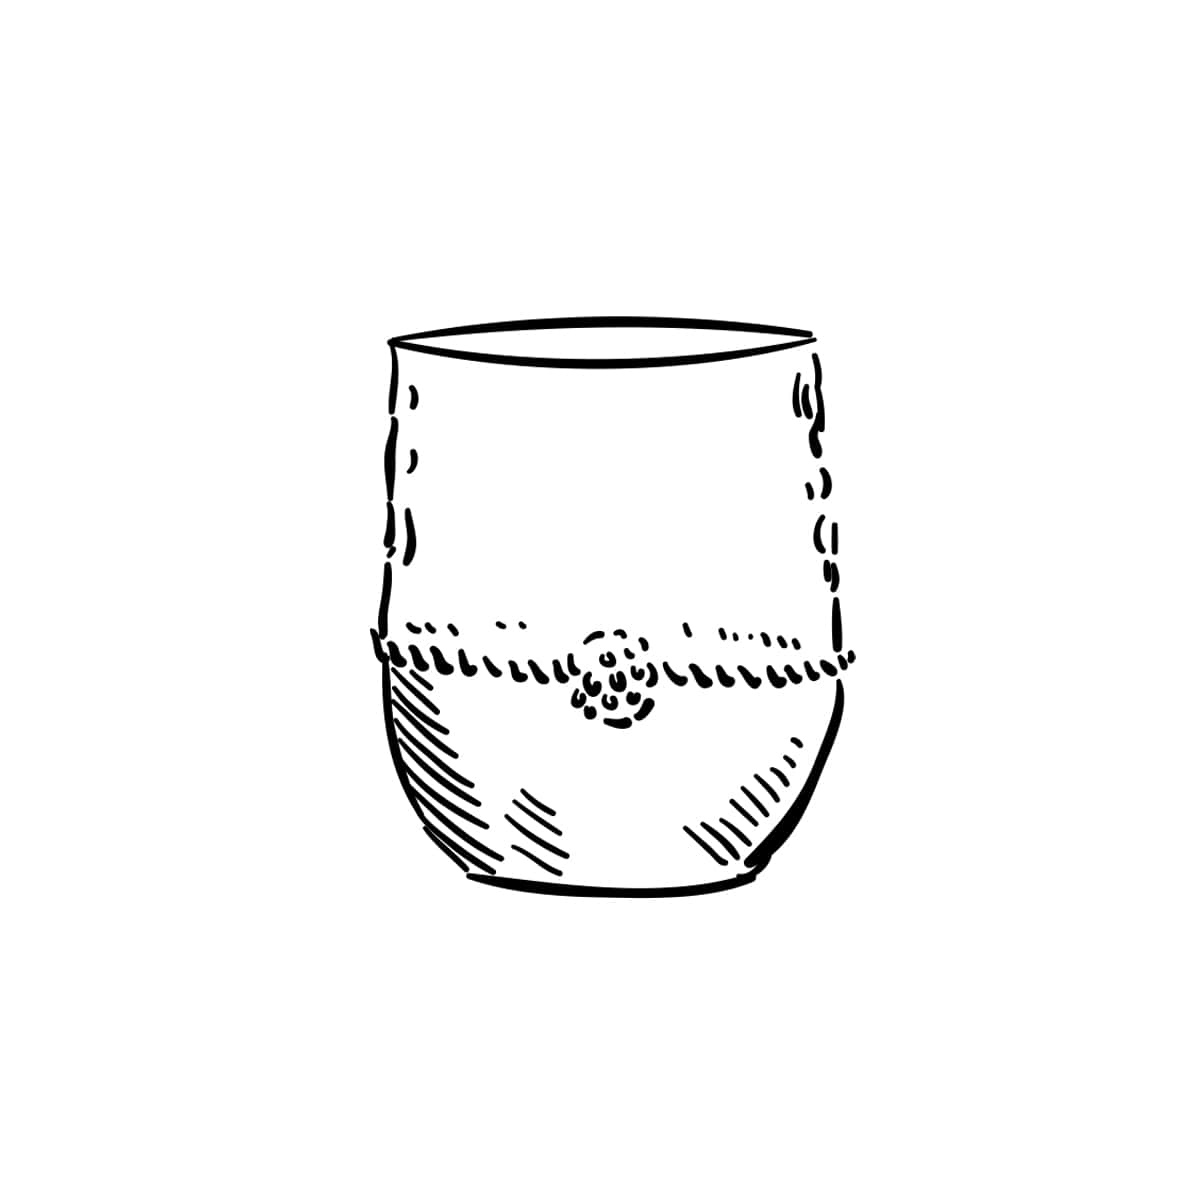 Black and white illustration of small tumbler.